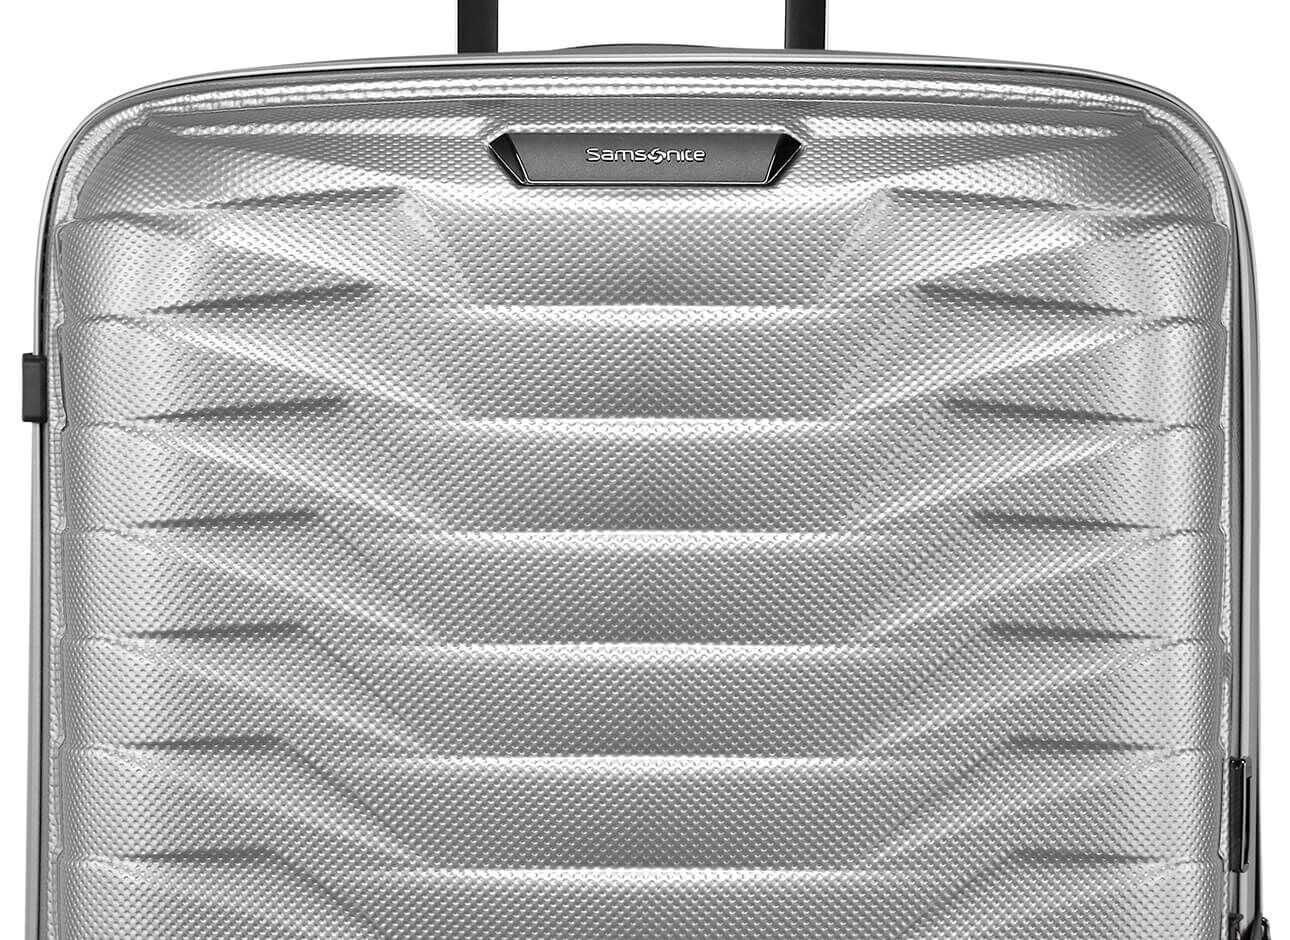 Samsonite Proxis Case in Silver Womens Bags Luggage and suitcases 81cm Metallic 